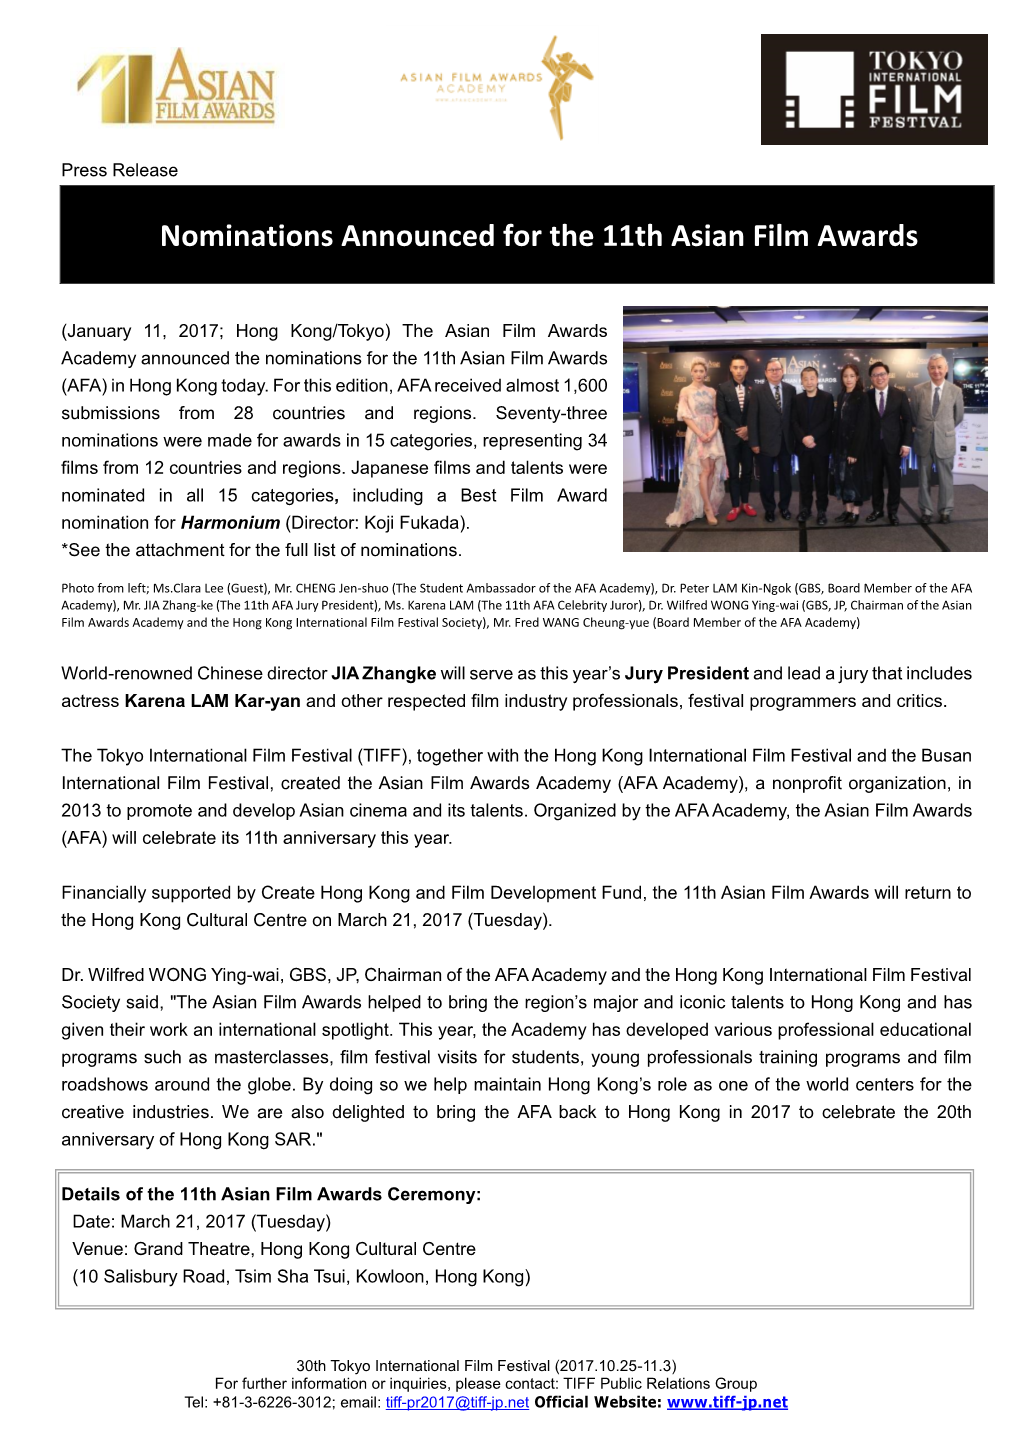 Nominations Announced for the 11Th Asian Film Awards